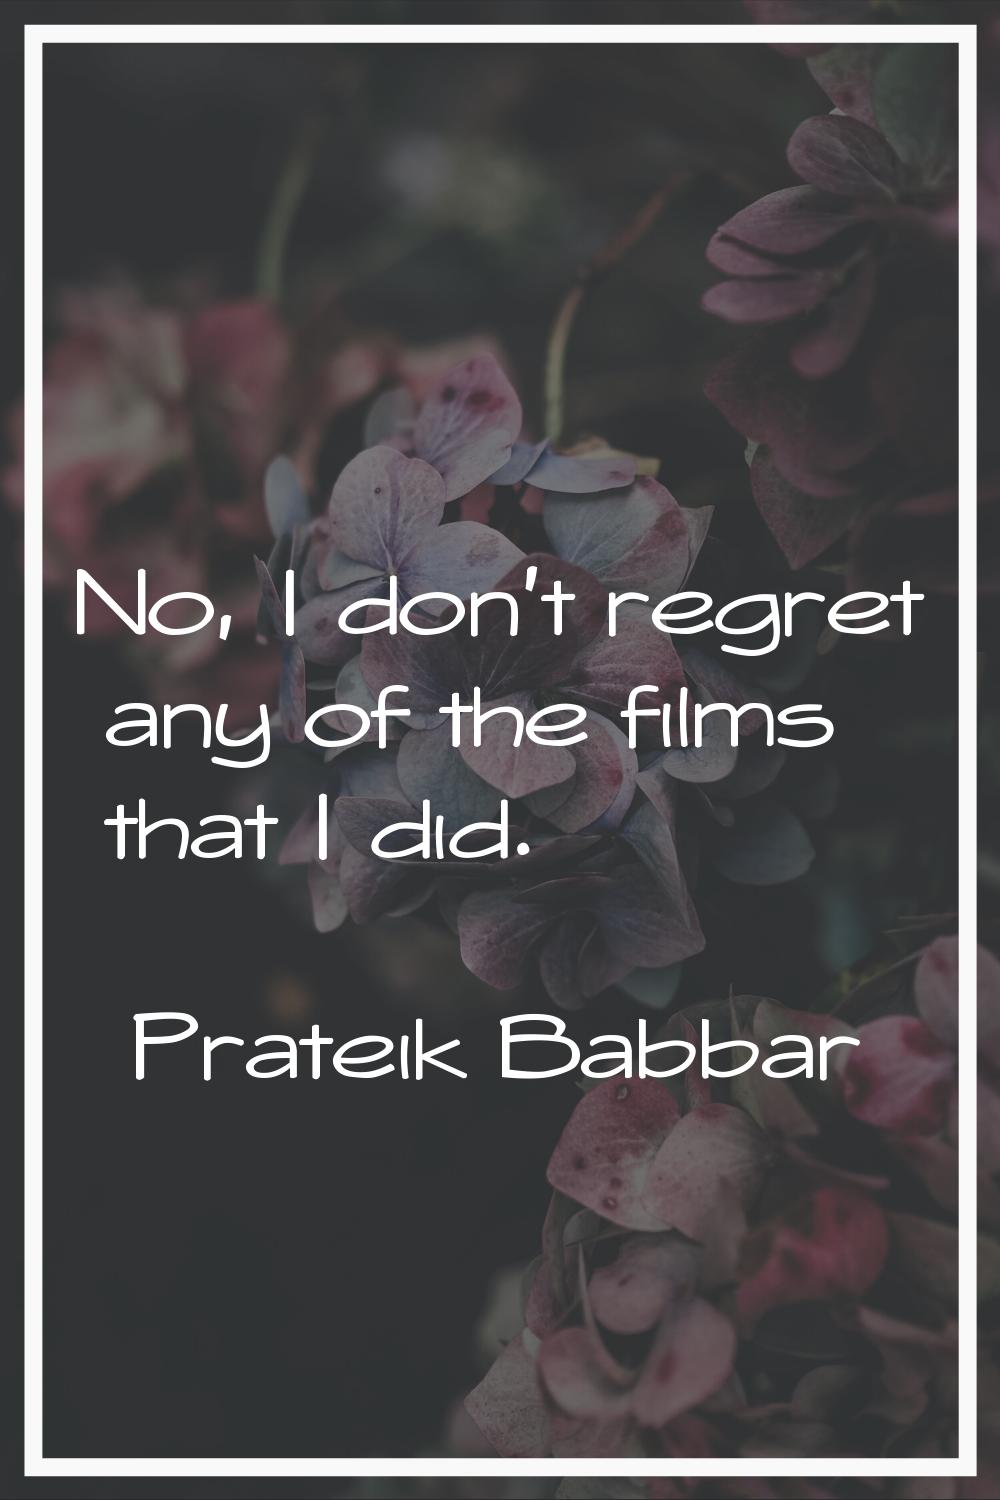 No, I don't regret any of the films that I did.